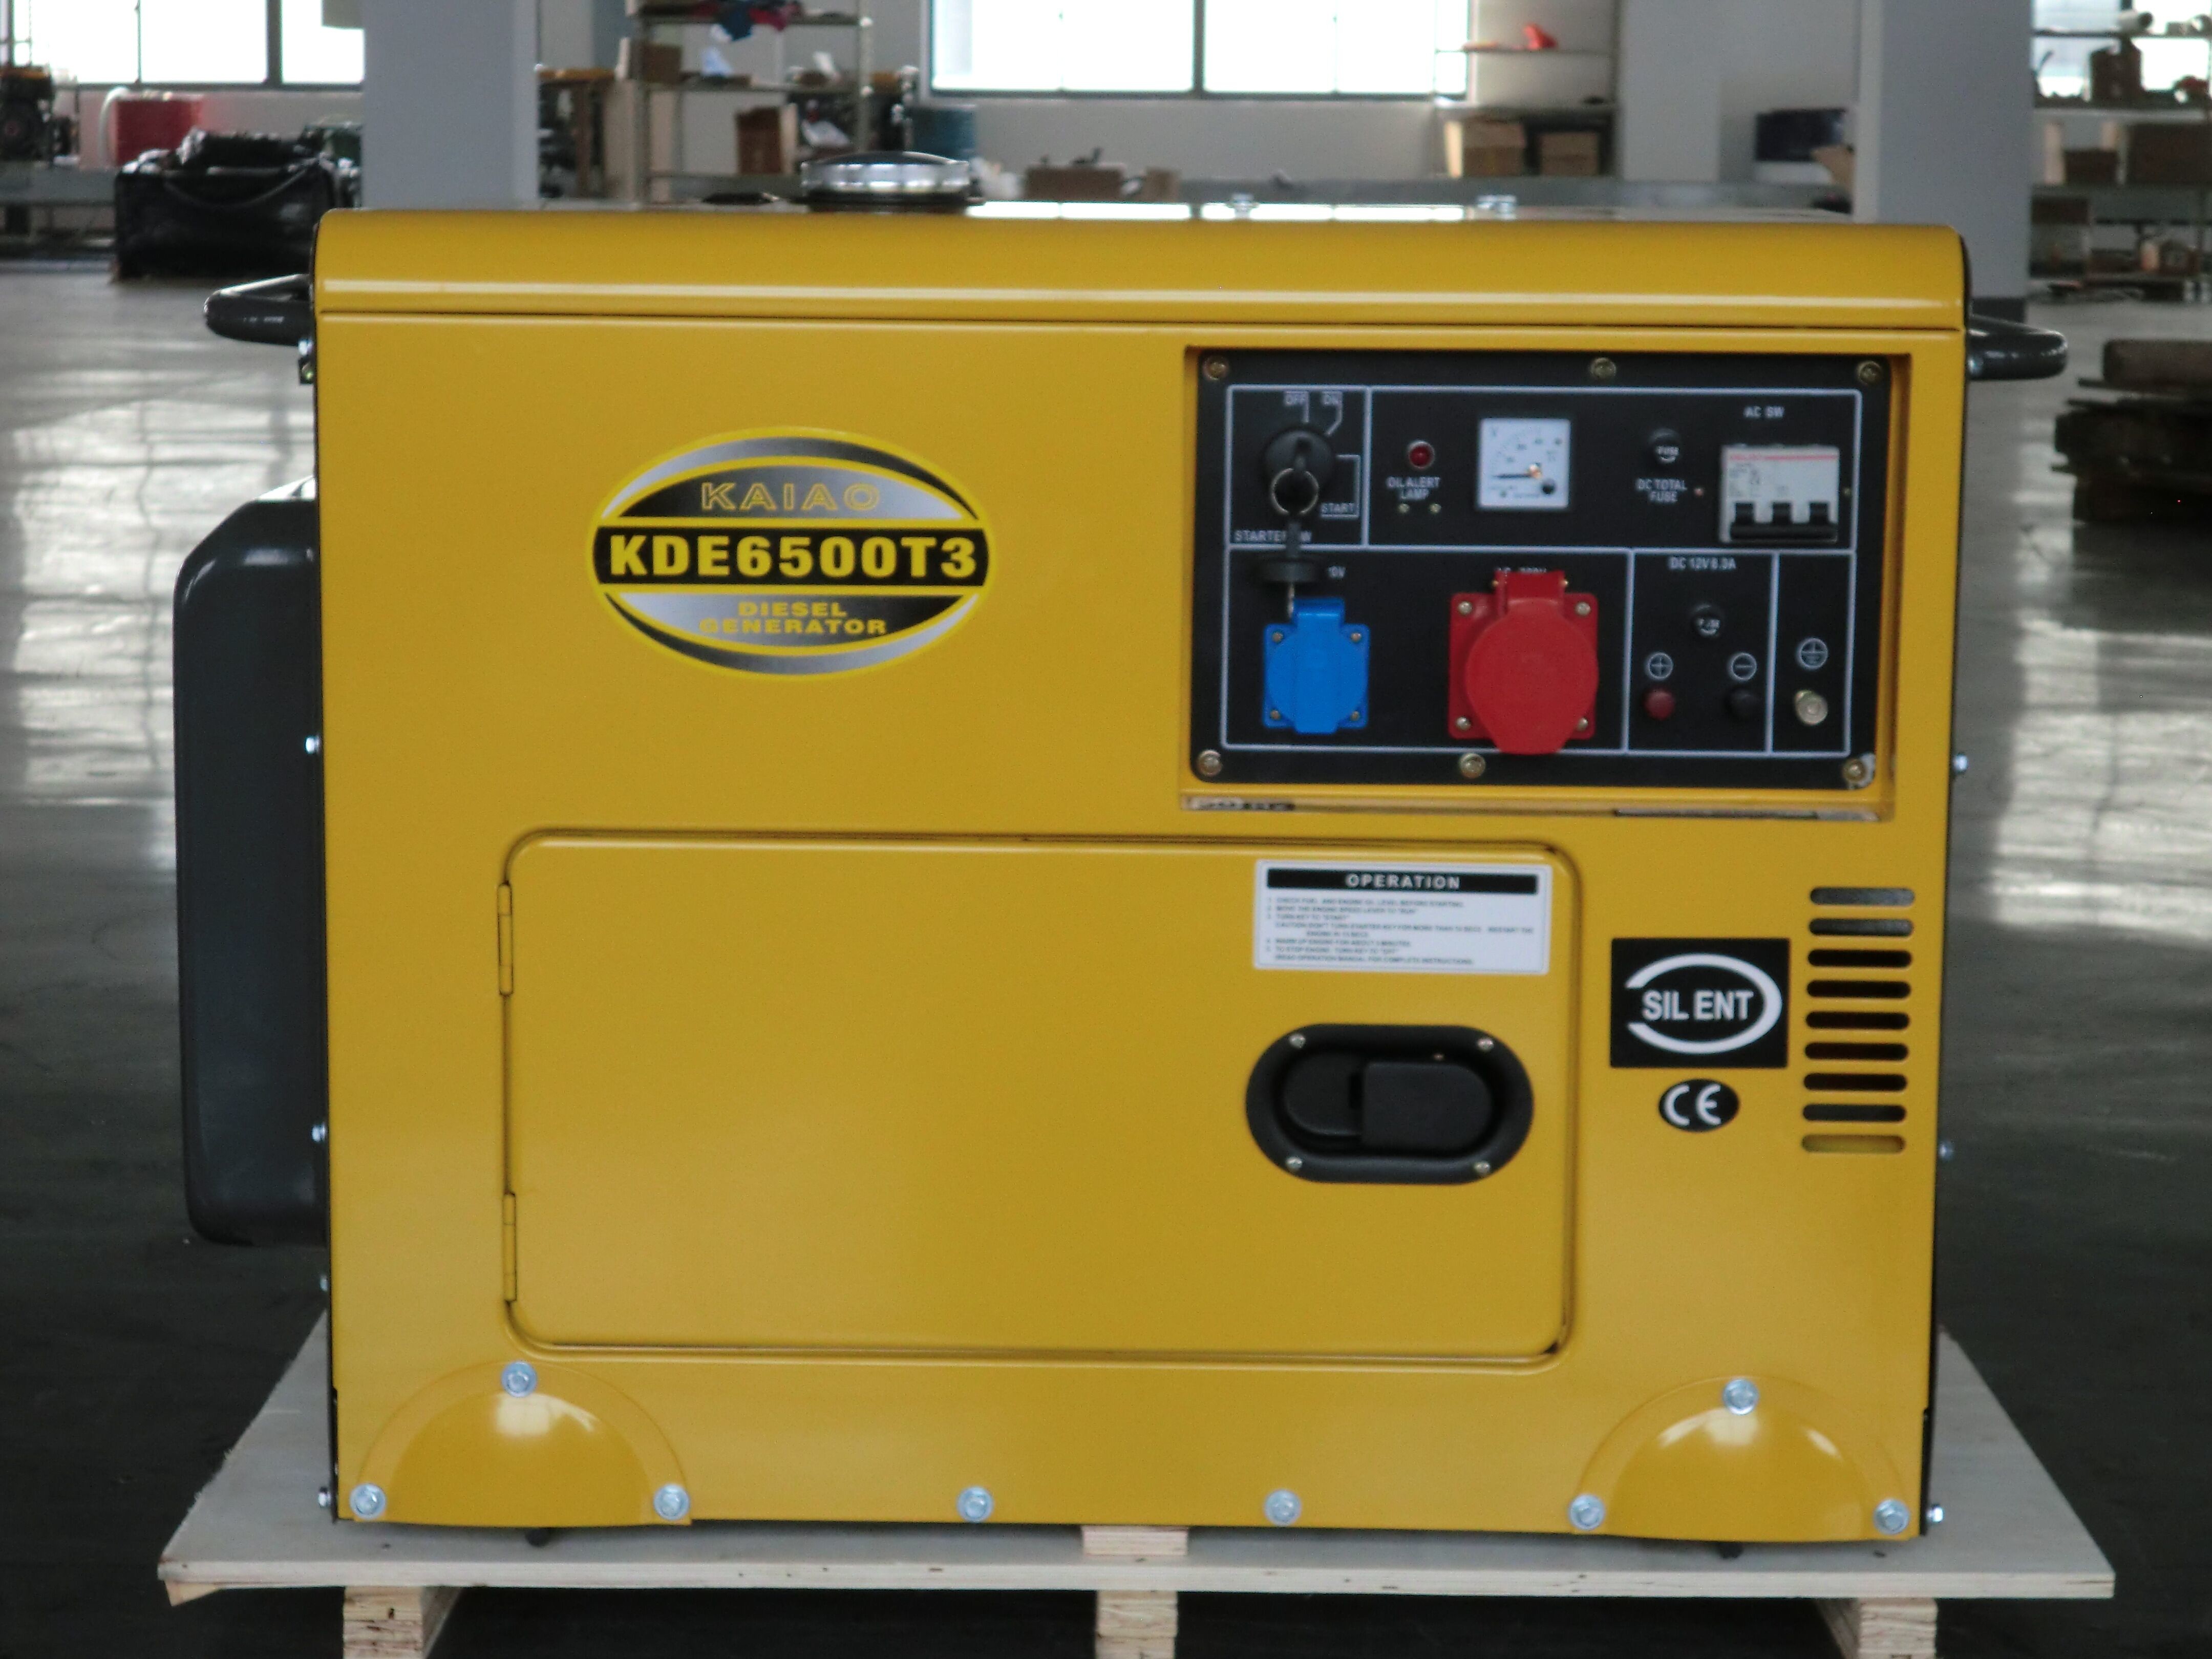 China Popular small portable generator--5kw diesel engine generator set from china factory wholesale